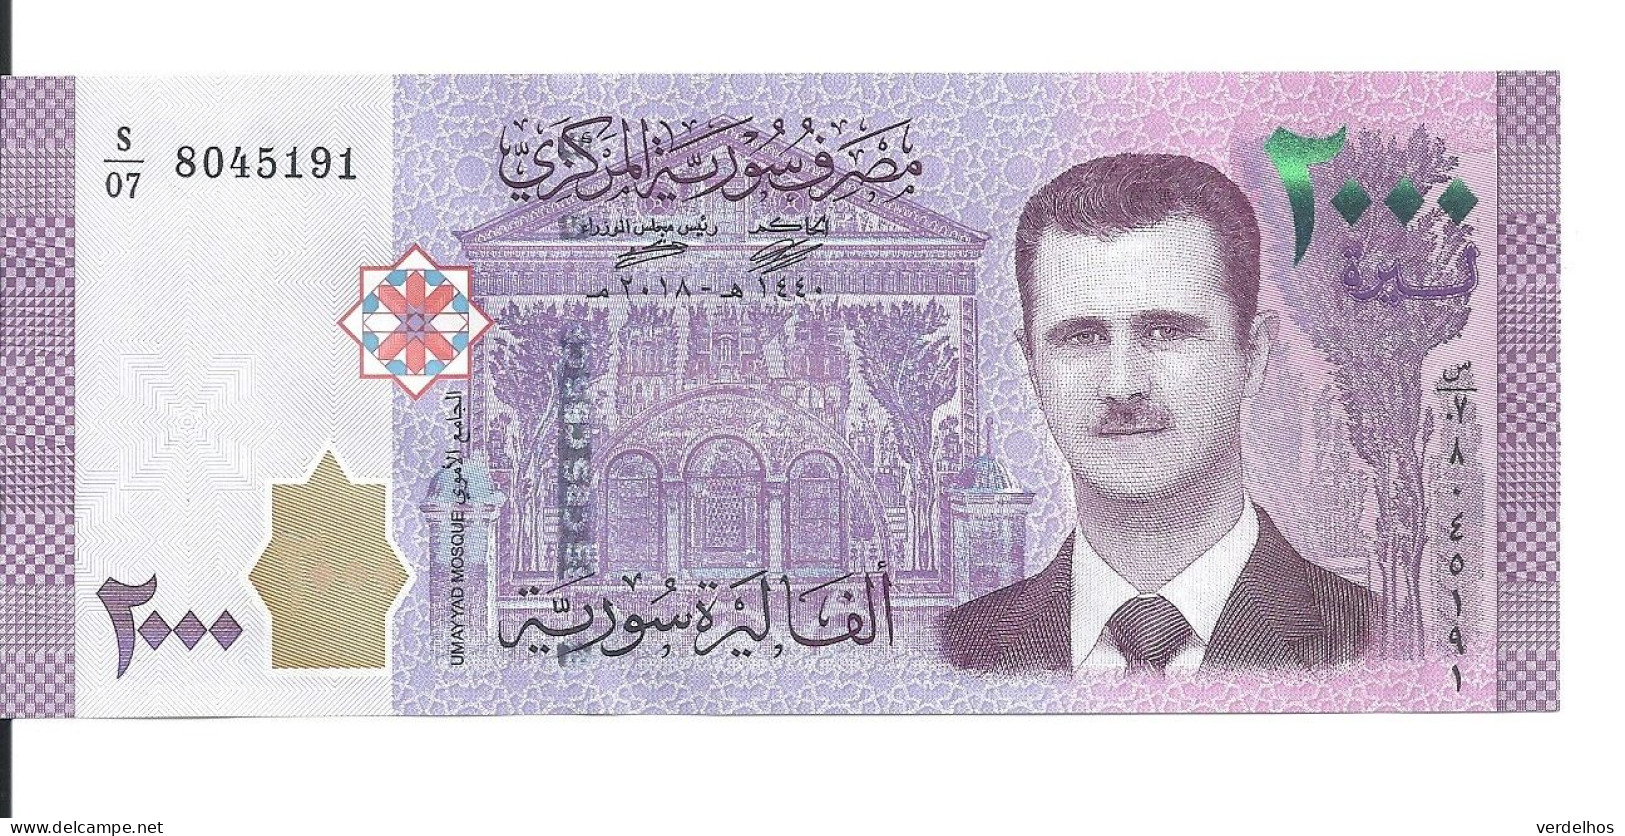 SYRIE 2000 POUNDS 2018 UNC P 117 C - Syrie